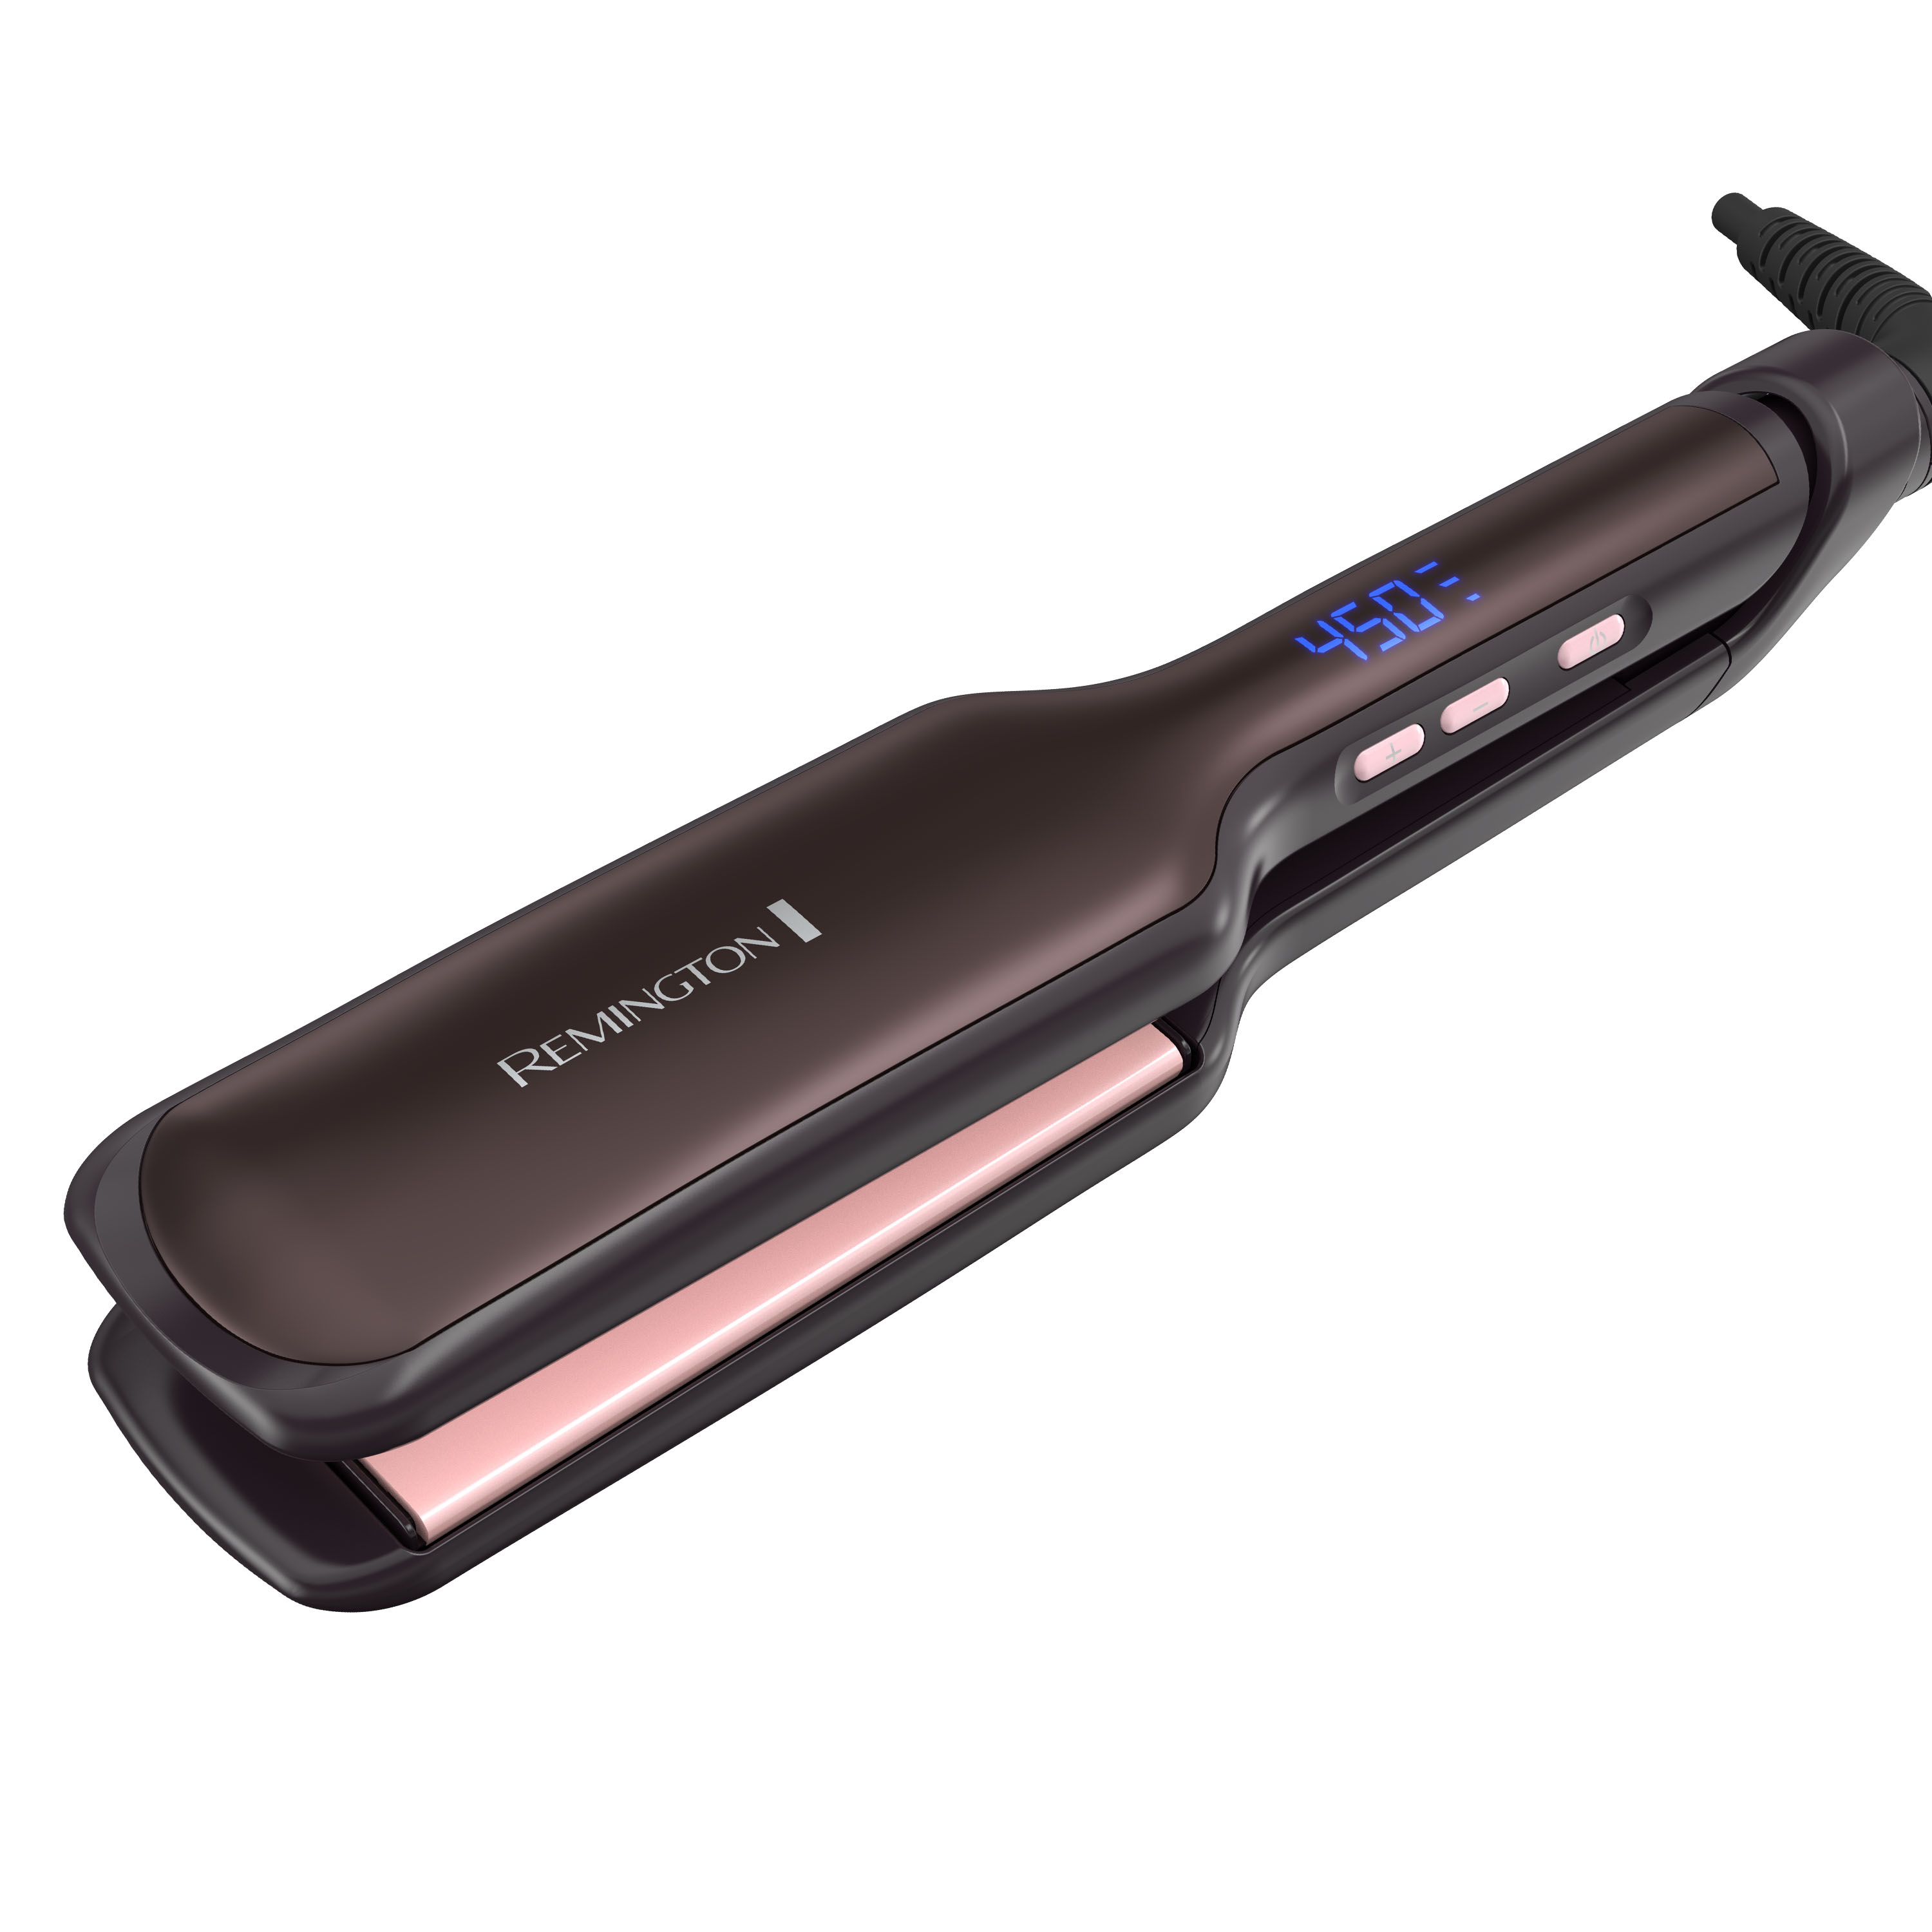 Remington Pro Soft Touch Finish and Digital Controls Professional 2" Pearl Ceramic Flat Iron Hair Straightener, Black - image 9 of 15